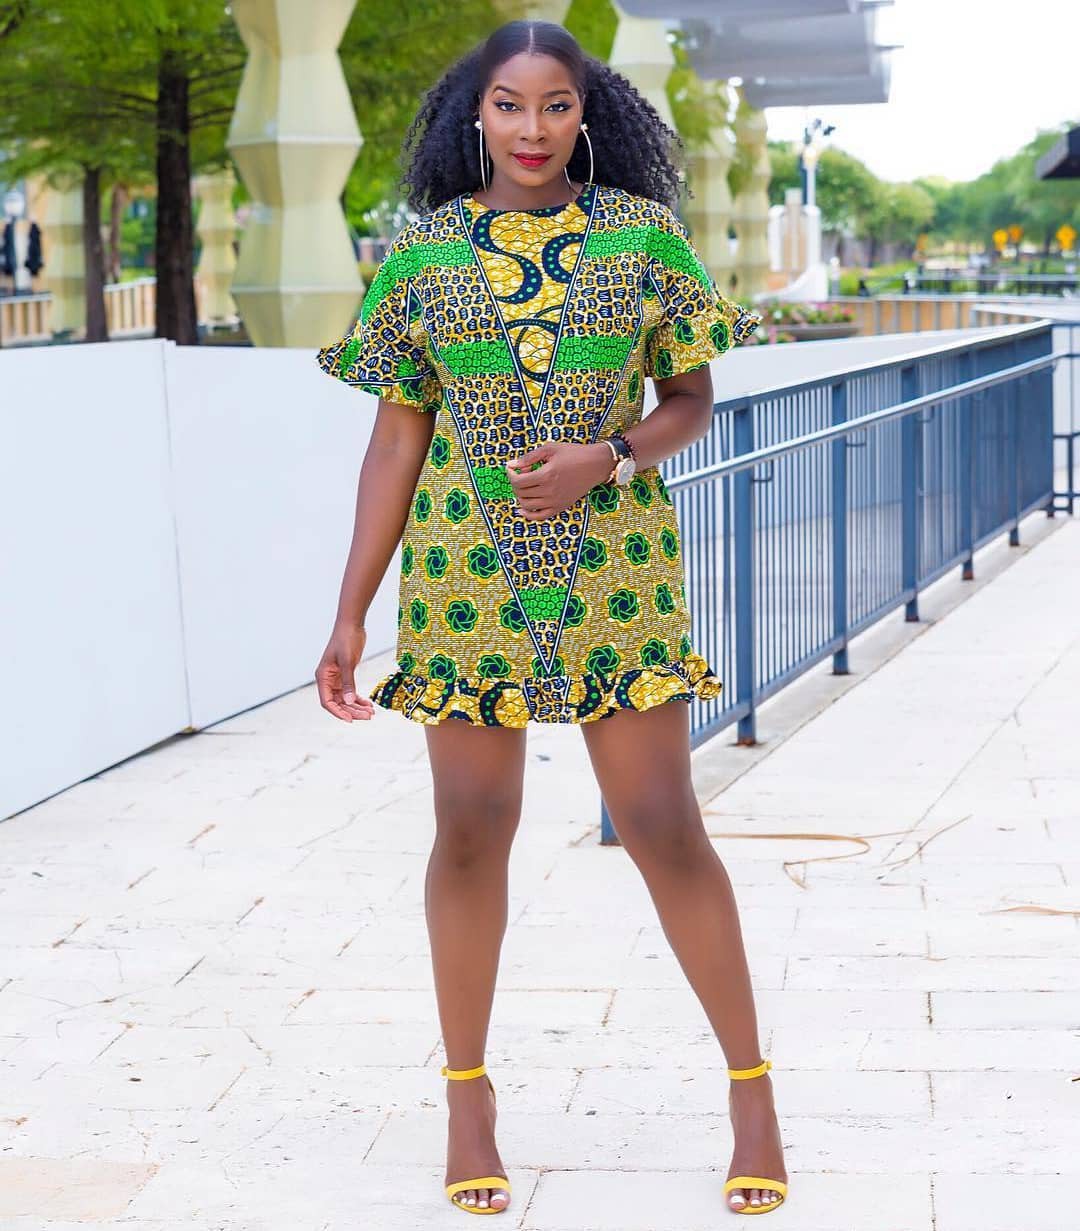 Latest Afro Dress Inspo For Girls: African fashion,  Ankara Dresses,  Ankara Fashion,  Ankara Outfits,  African Attire,  Asoebi Special  